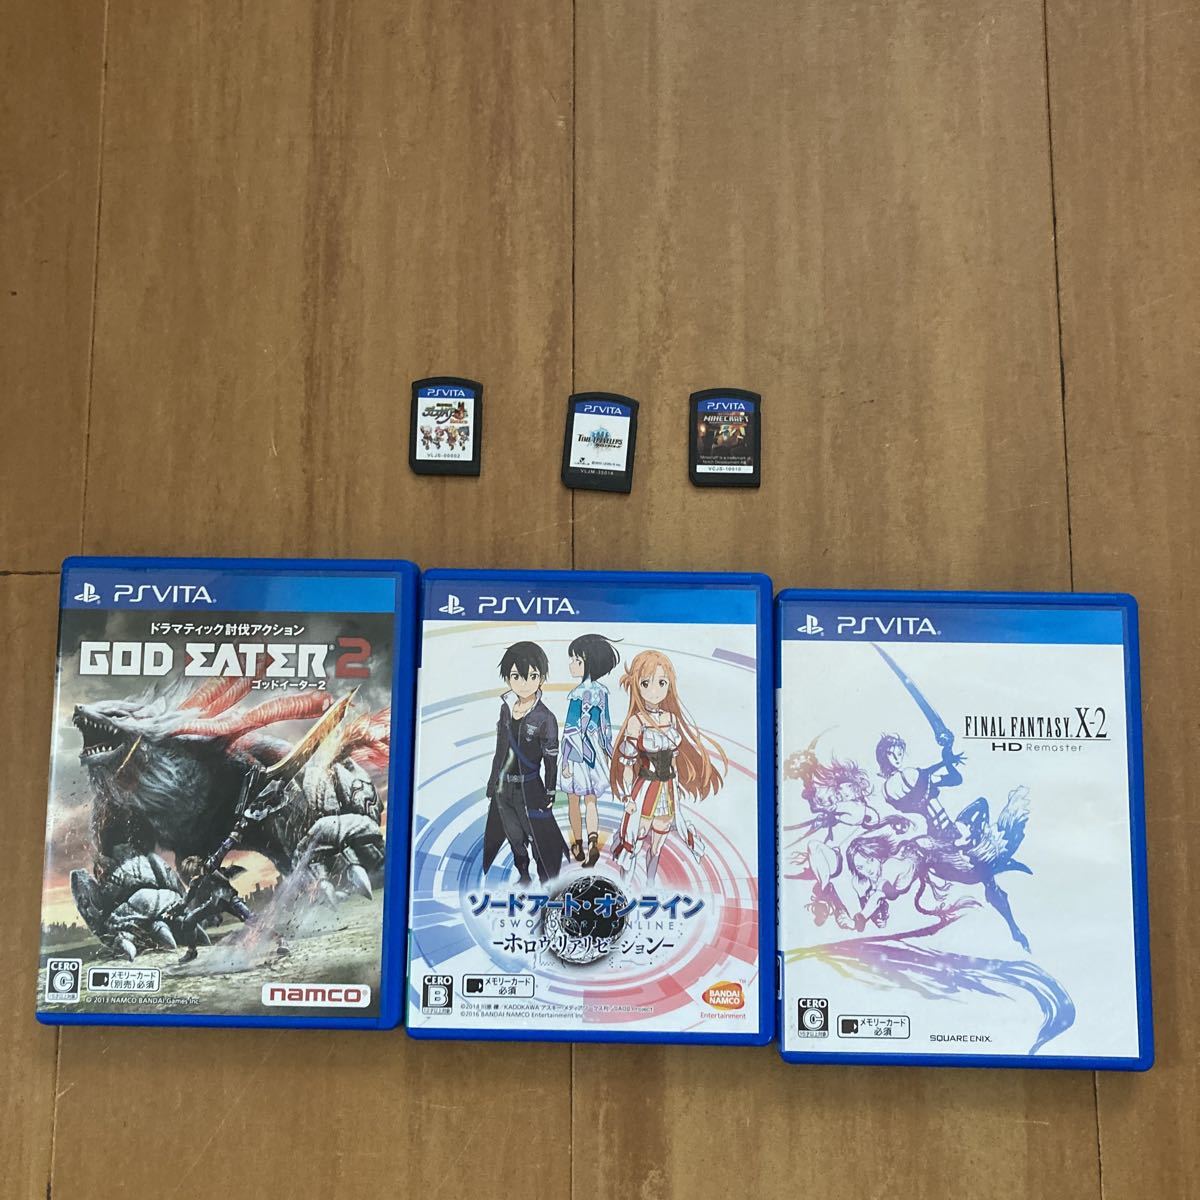 PS Vita ソフト まとめ 商品细节 | 雅虎拍卖 | One Map by FROM JAPAN